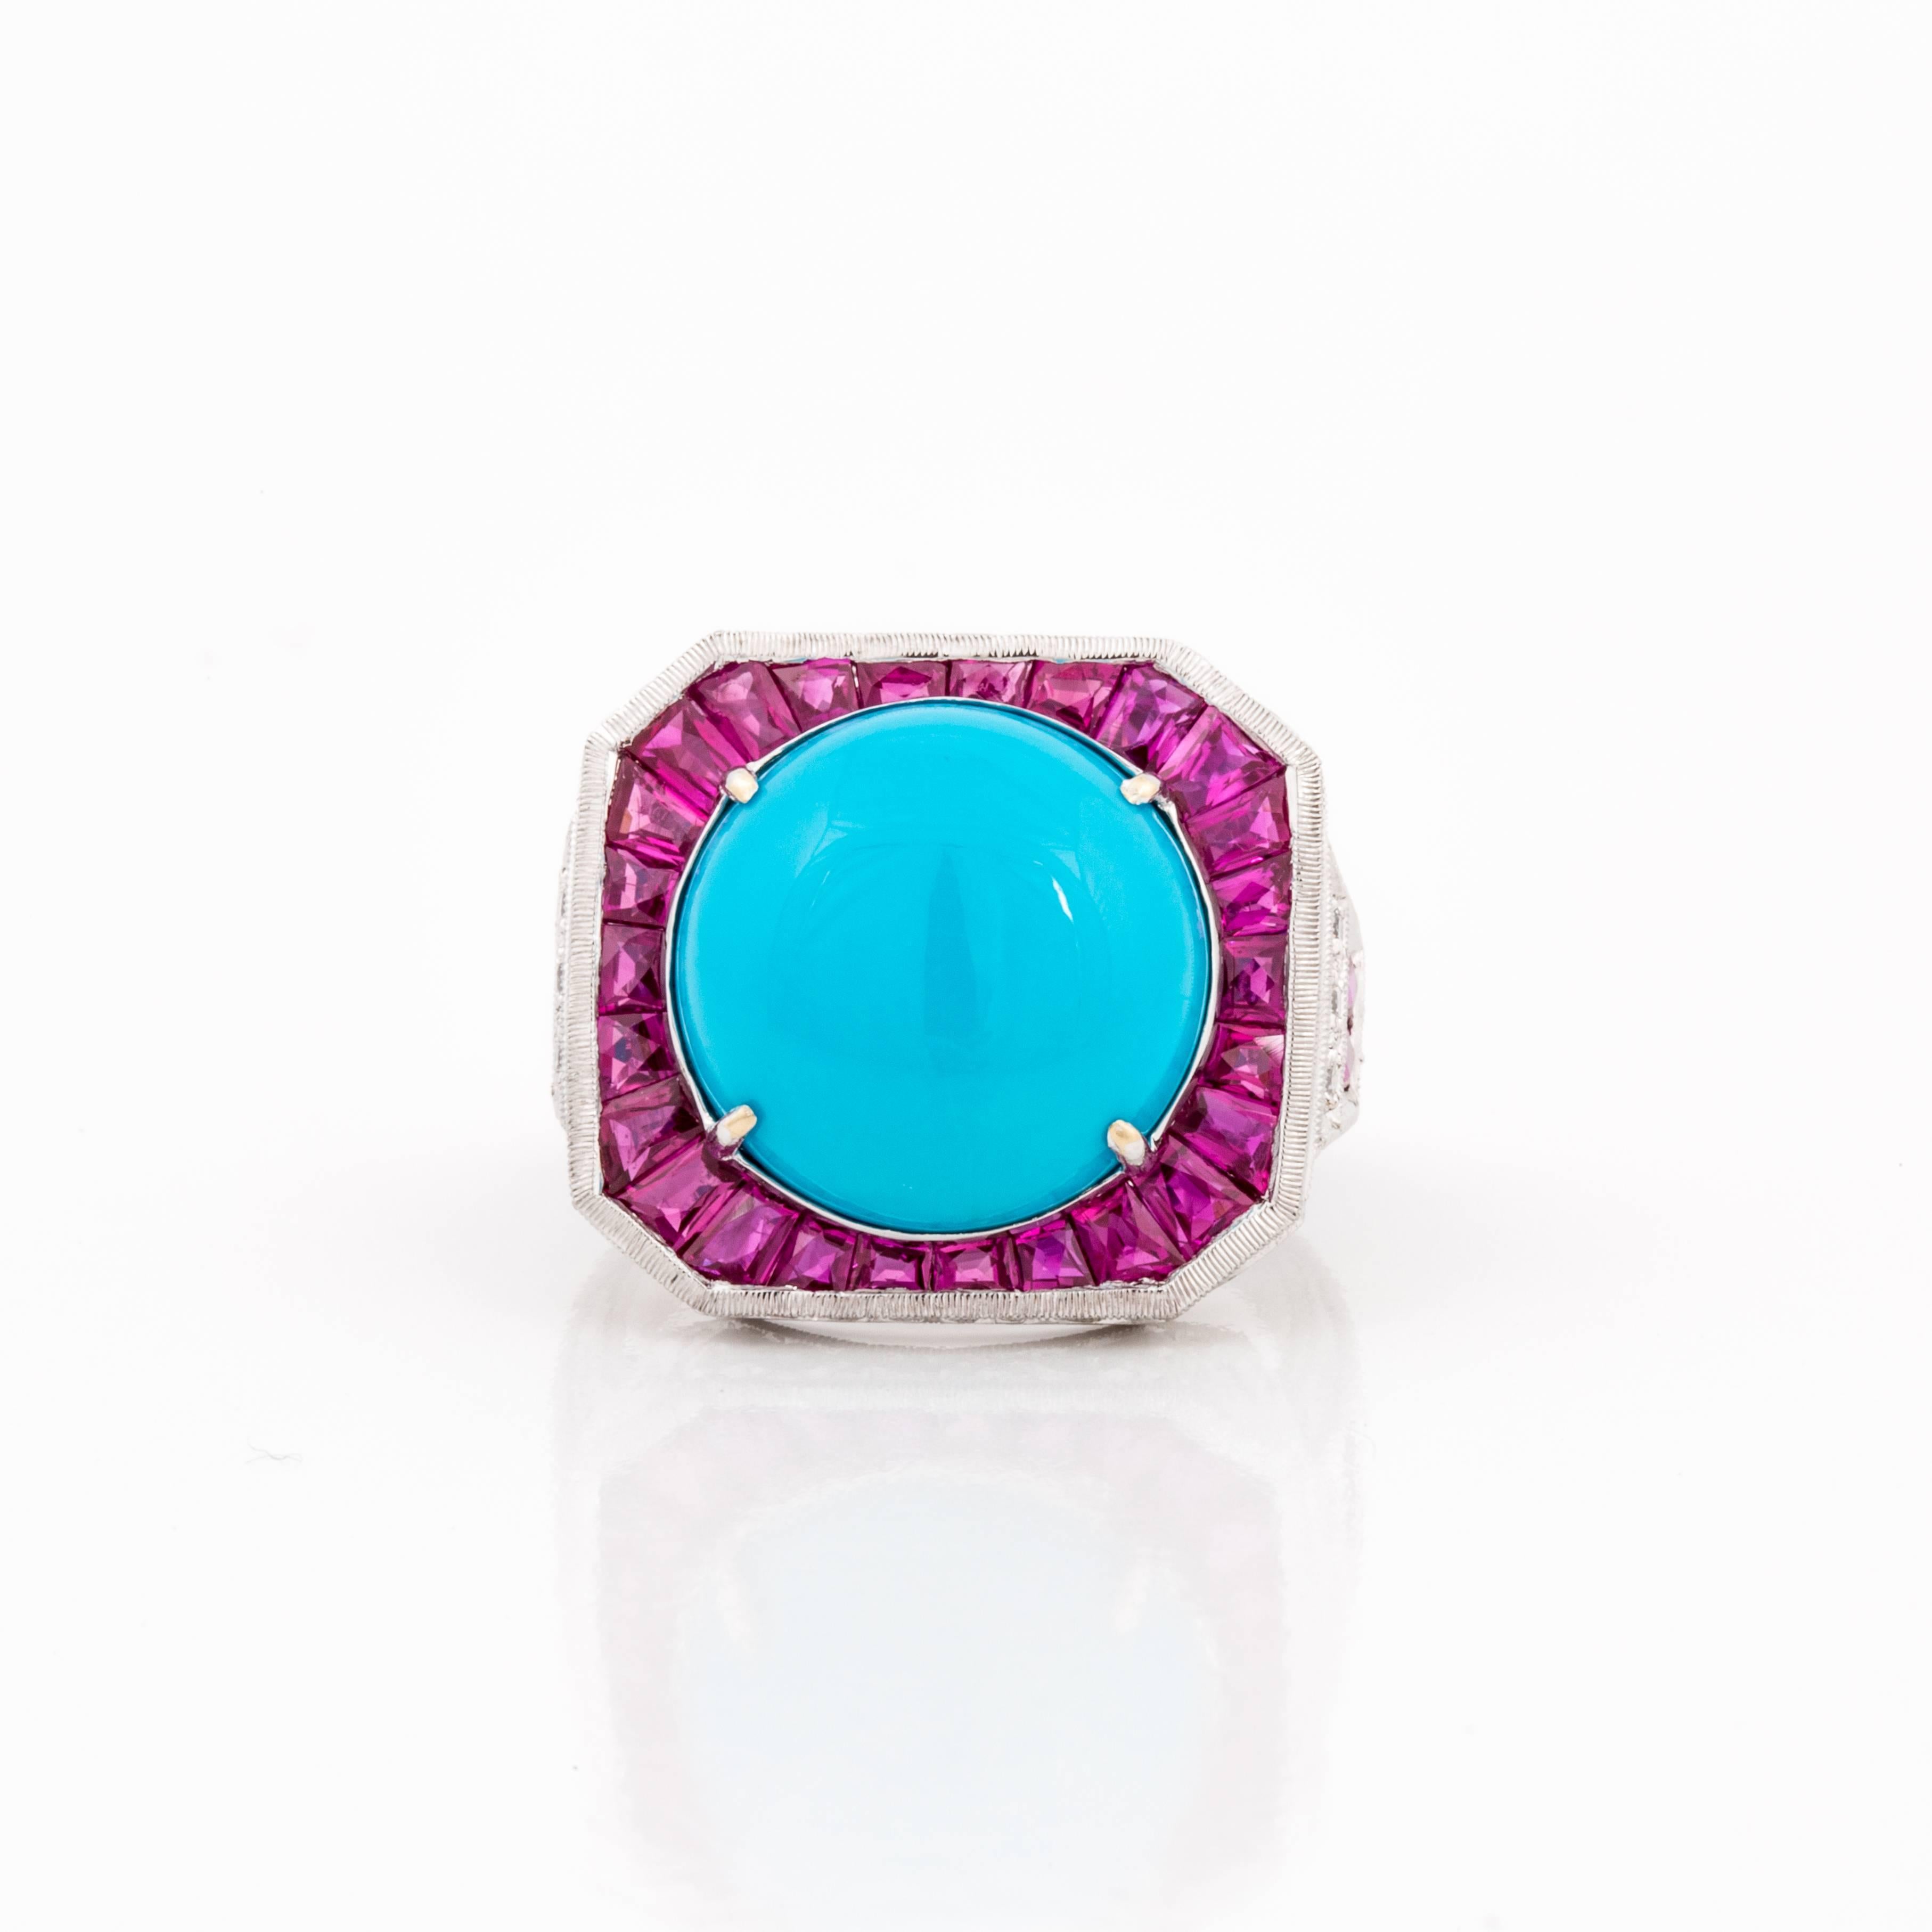 18K white gold ring featuring a round cabochon turquoise stone surrounded by 30 calibré-cut rubies.  The rubies total 3.10 carats.  Additionally there are eight round diamonds that total 0.10 carats, G-H color and VS clarity.  Presentation area is